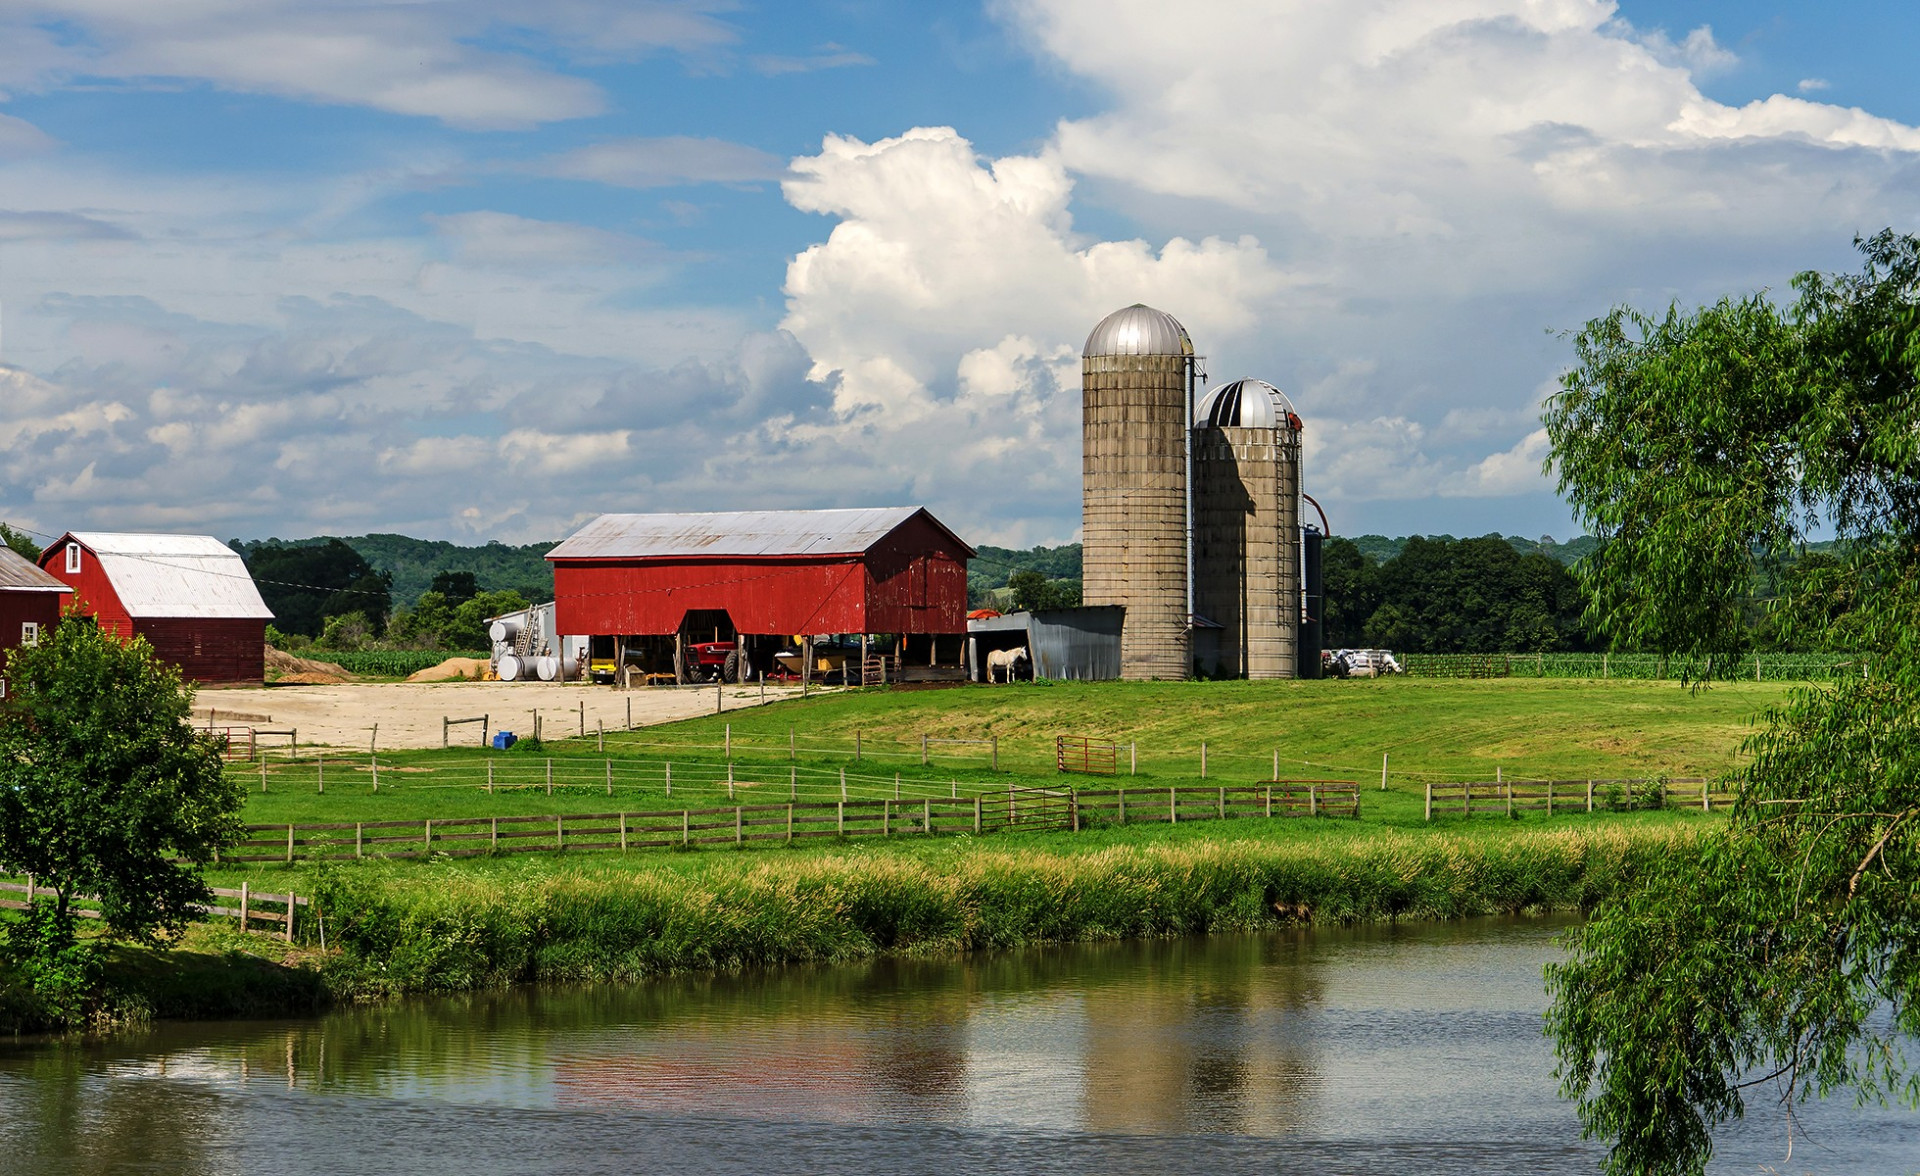 A picturesque farm with a red barn and silos on the banks of a small river. 